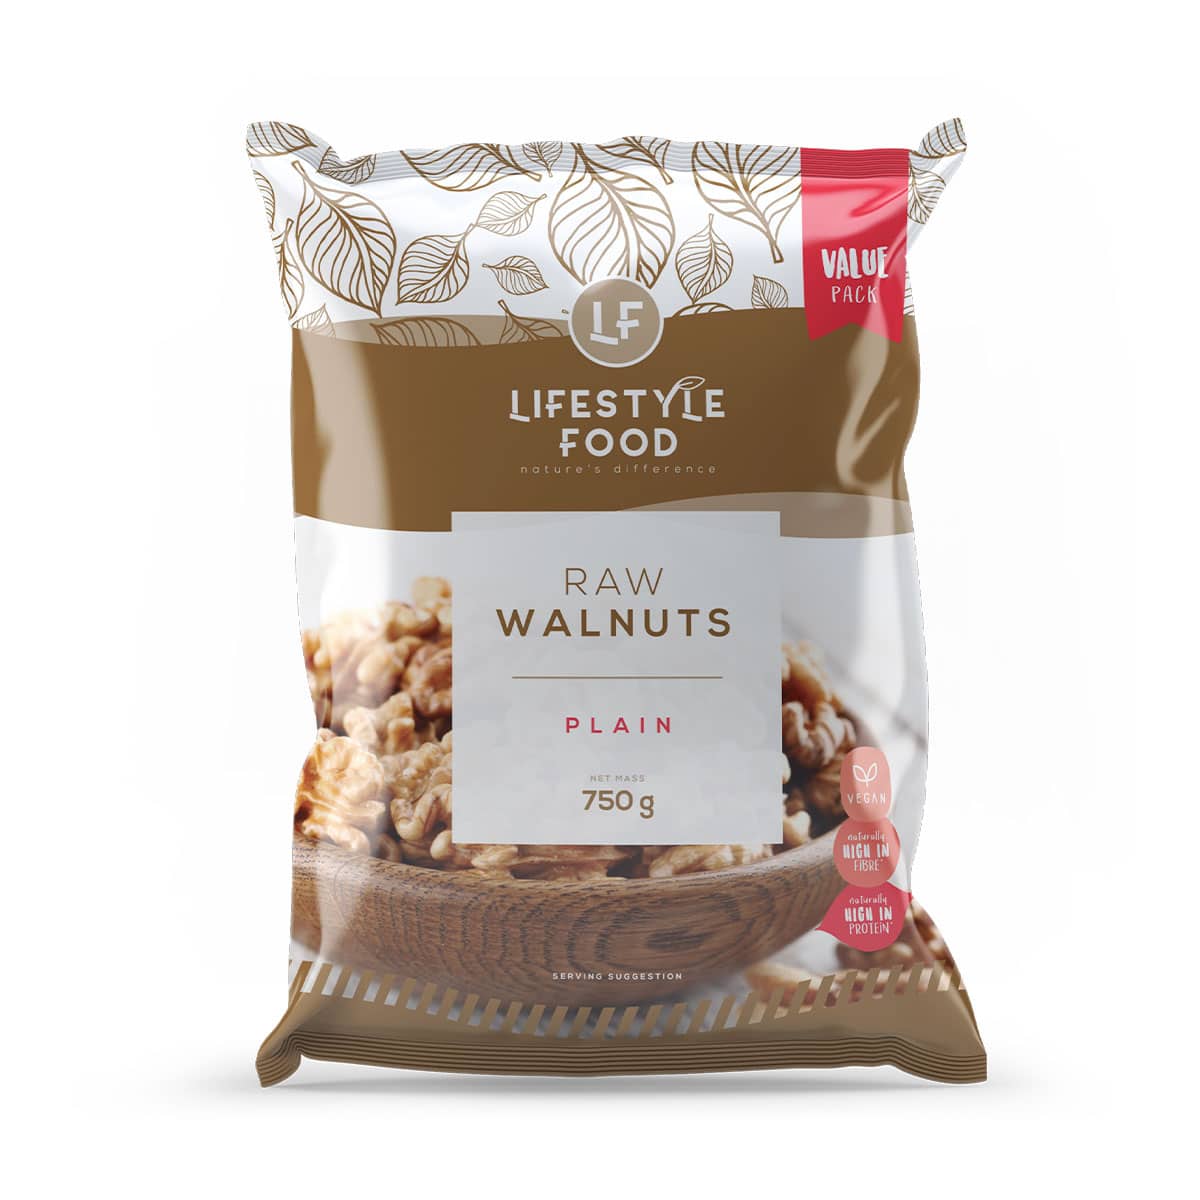 Lifestyle Food Raw Walnuts Value Pack - 750g